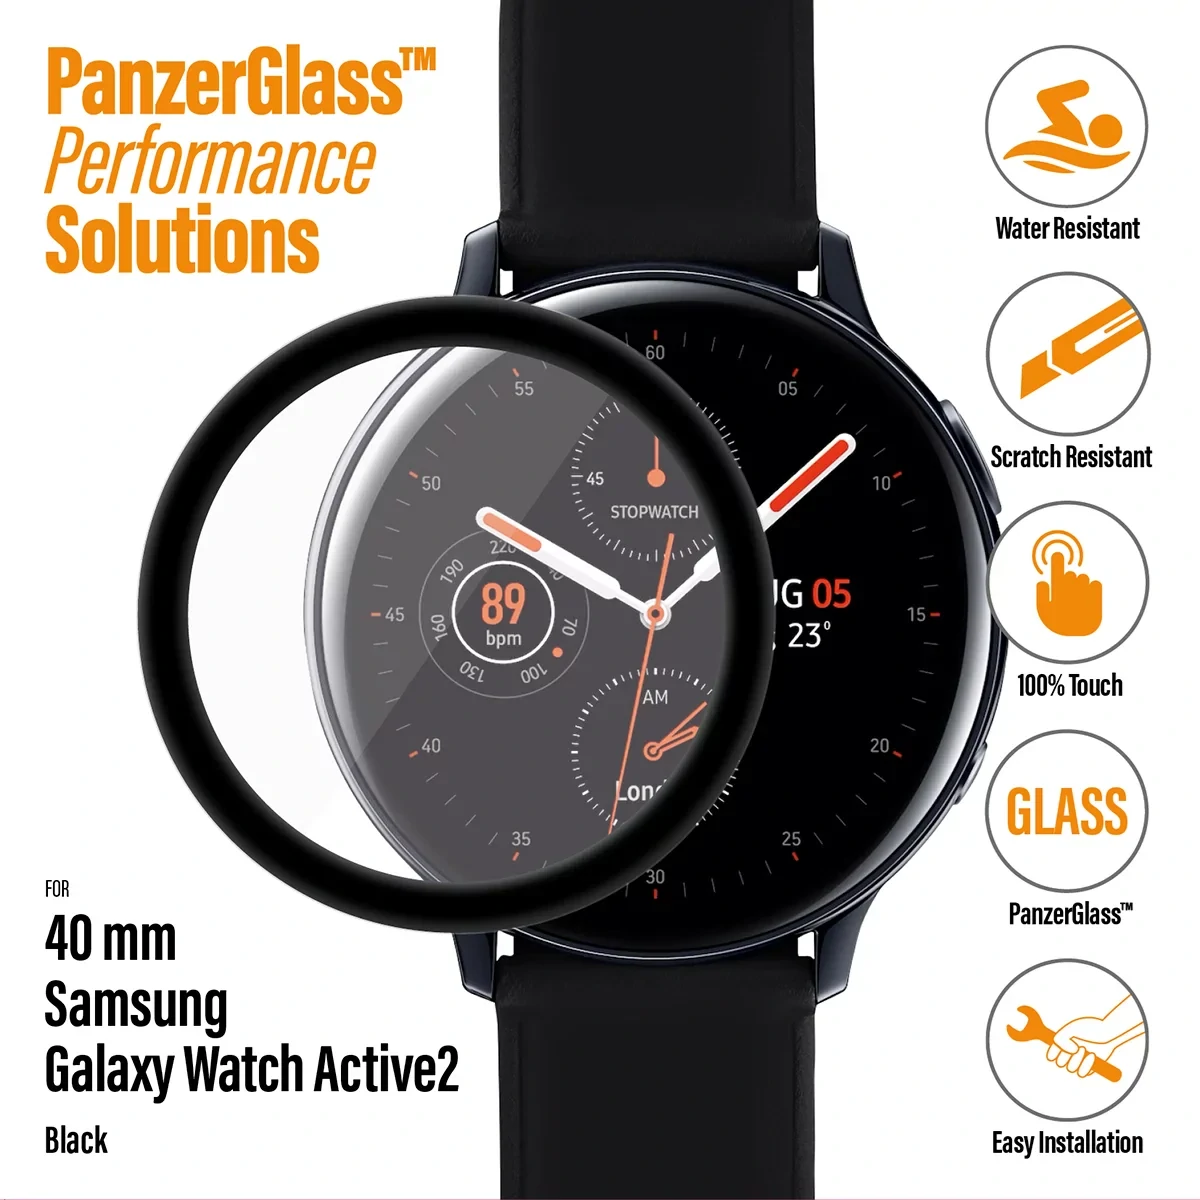 PanzerGlass Glass Screen Protector for Samsung Galaxy Watch Active 2 40mm Transparency / Black Frame thumb